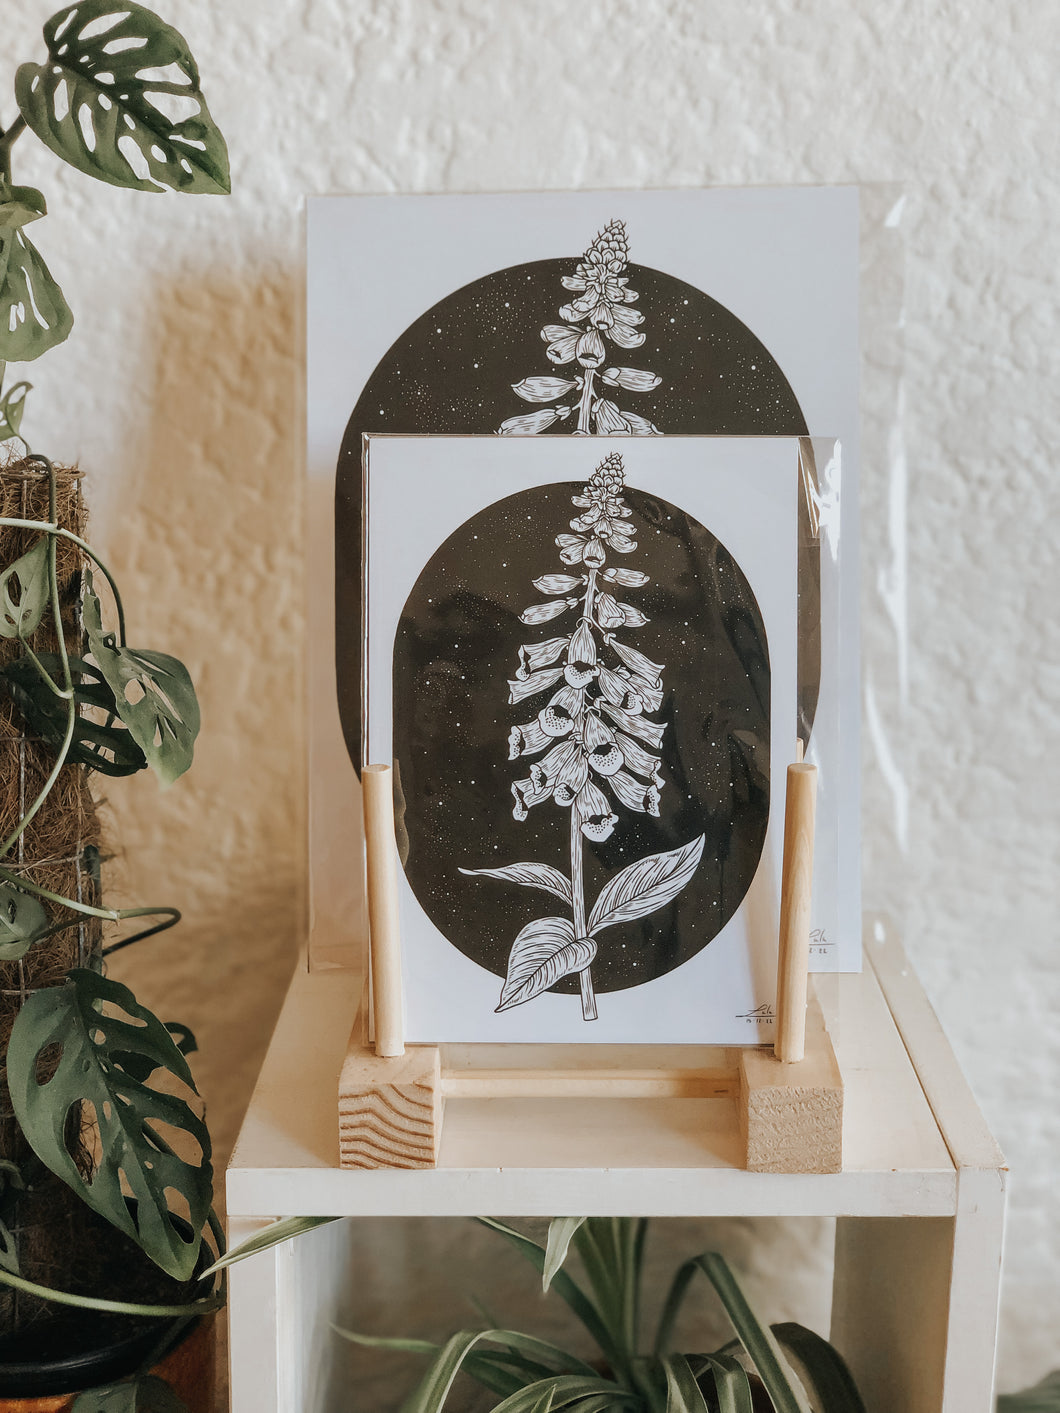 Black and white illustration of foxglove flowers under a starry night background. Pair your prints with other illustrations to create a whimsical story of your own.